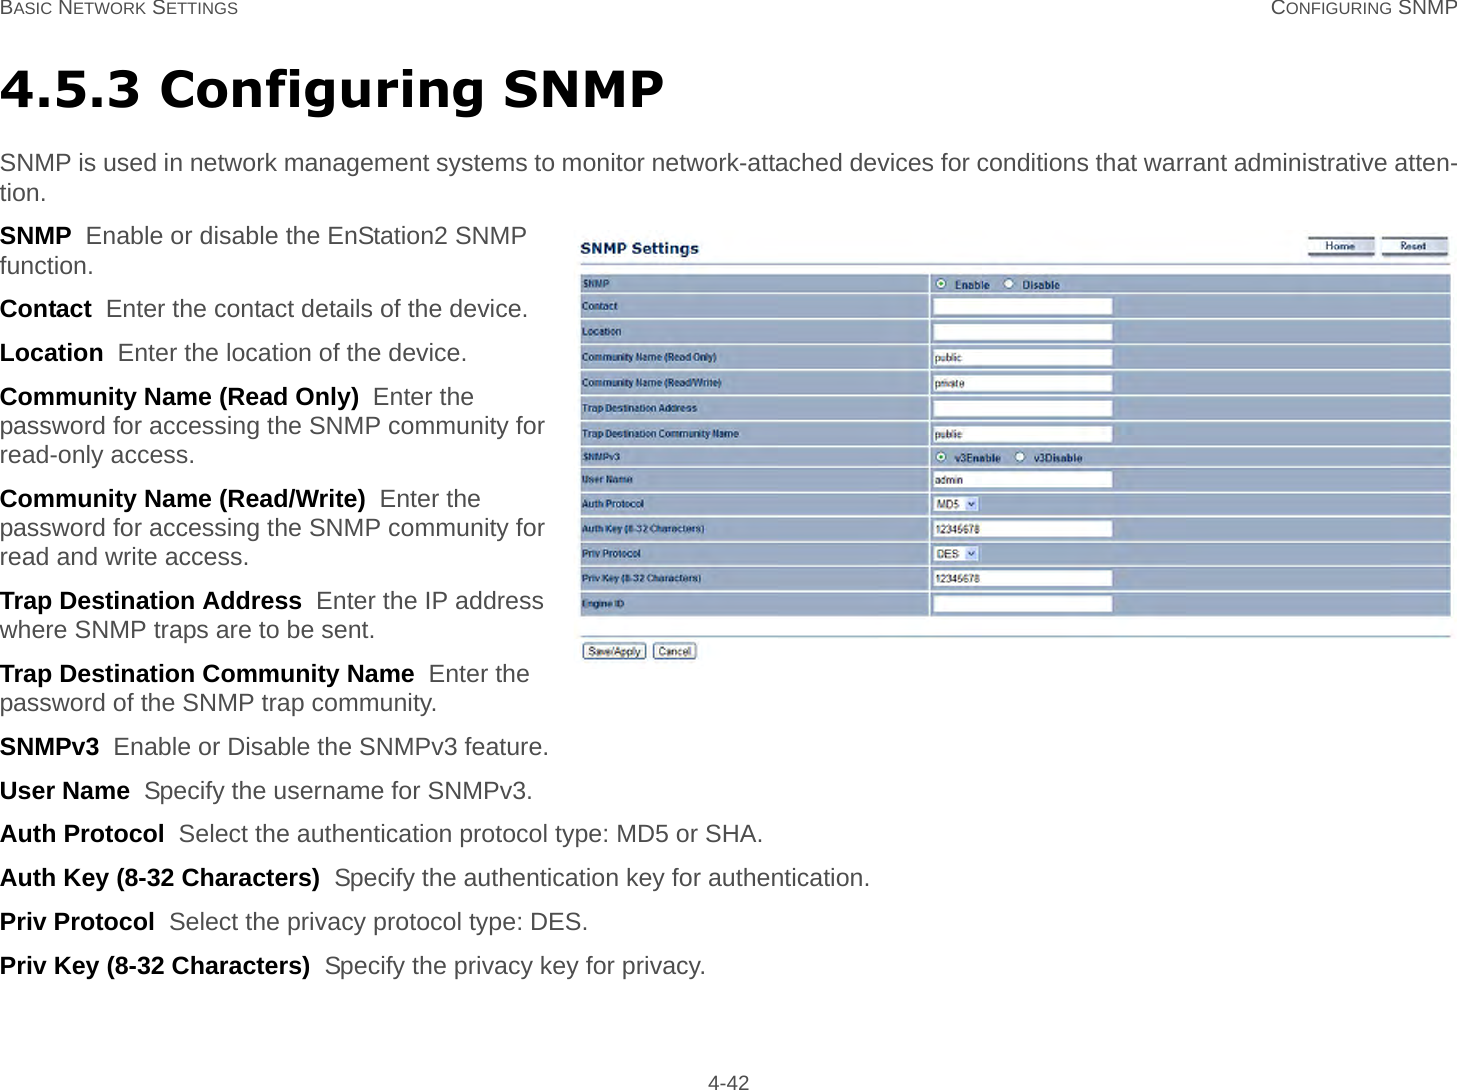 BASIC NETWORK SETTINGS CONFIGURING SNMP 4-424.5.3 Configuring SNMPSNMP is used in network management systems to monitor network-attached devices for conditions that warrant administrative atten-tion.SNMP  Enable or disable the EnStation2 SNMP function.Contact  Enter the contact details of the device.Location  Enter the location of the device.Community Name (Read Only)  Enter the password for accessing the SNMP community for read-only access.Community Name (Read/Write)  Enter the password for accessing the SNMP community for read and write access.Trap Destination Address  Enter the IP address where SNMP traps are to be sent.Trap Destination Community Name  Enter the password of the SNMP trap community.SNMPv3  Enable or Disable the SNMPv3 feature.User Name  Specify the username for SNMPv3.Auth Protocol  Select the authentication protocol type: MD5 or SHA.Auth Key (8-32 Characters)  Specify the authentication key for authentication.Priv Protocol  Select the privacy protocol type: DES.Priv Key (8-32 Characters)  Specify the privacy key for privacy.